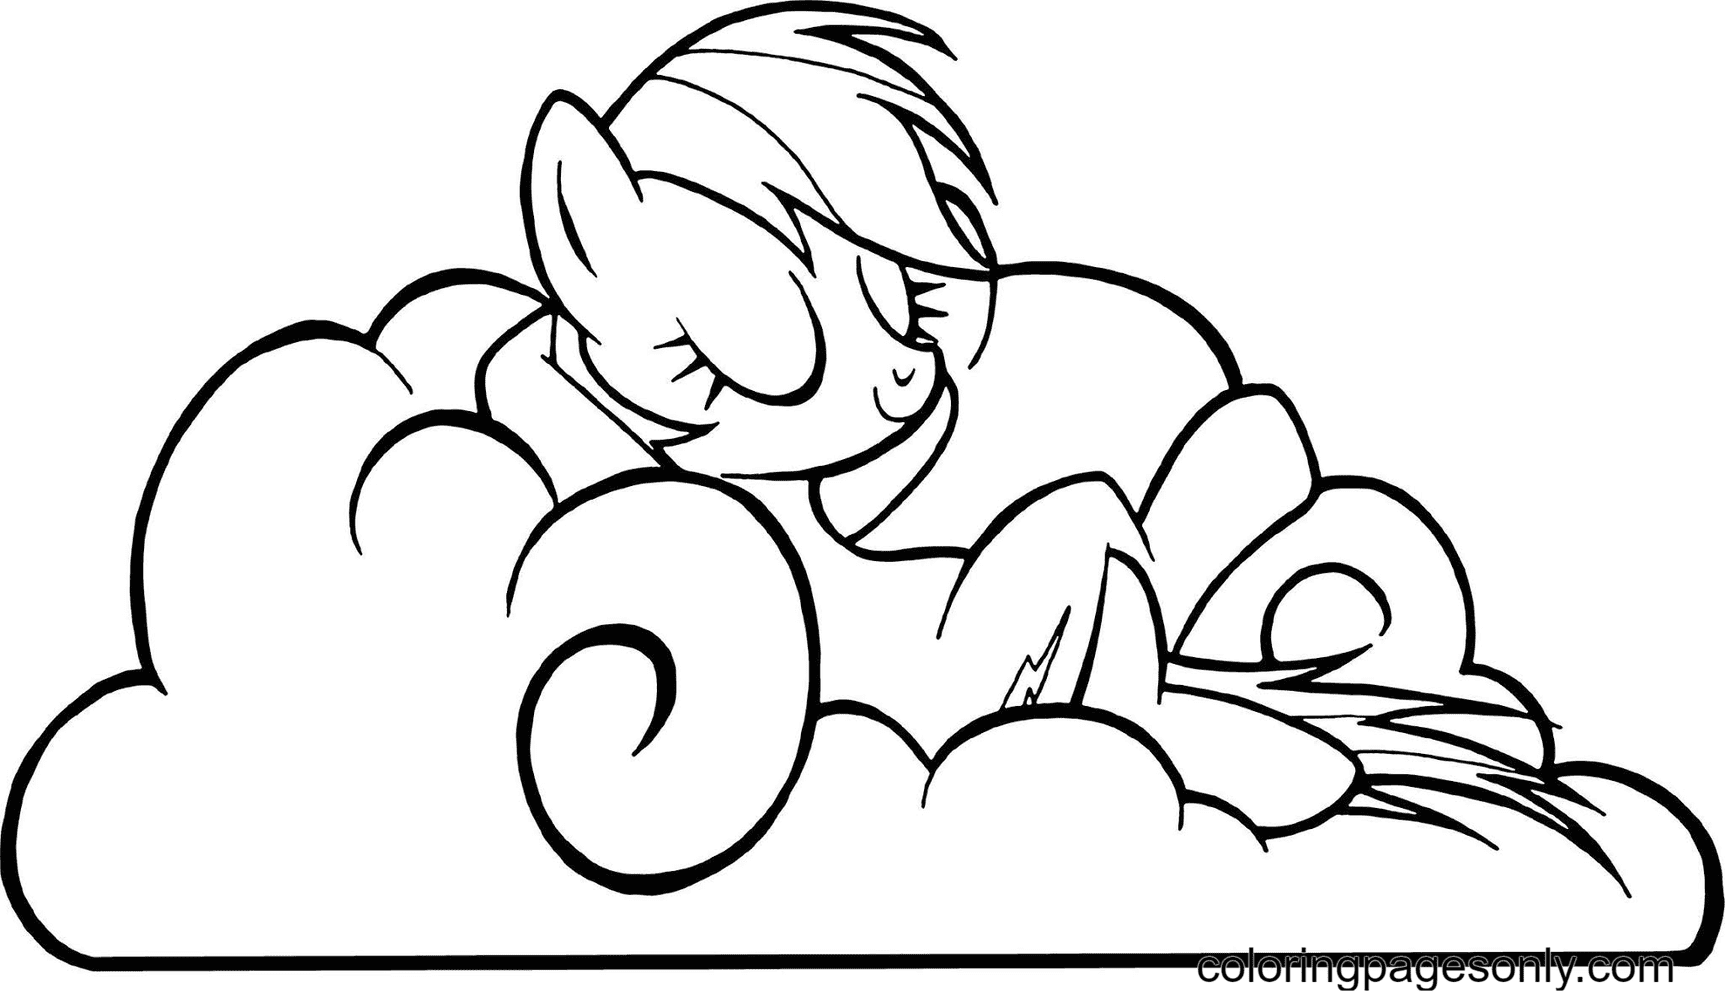 Pony Rainbow Dash Sleeping Coloring Pages